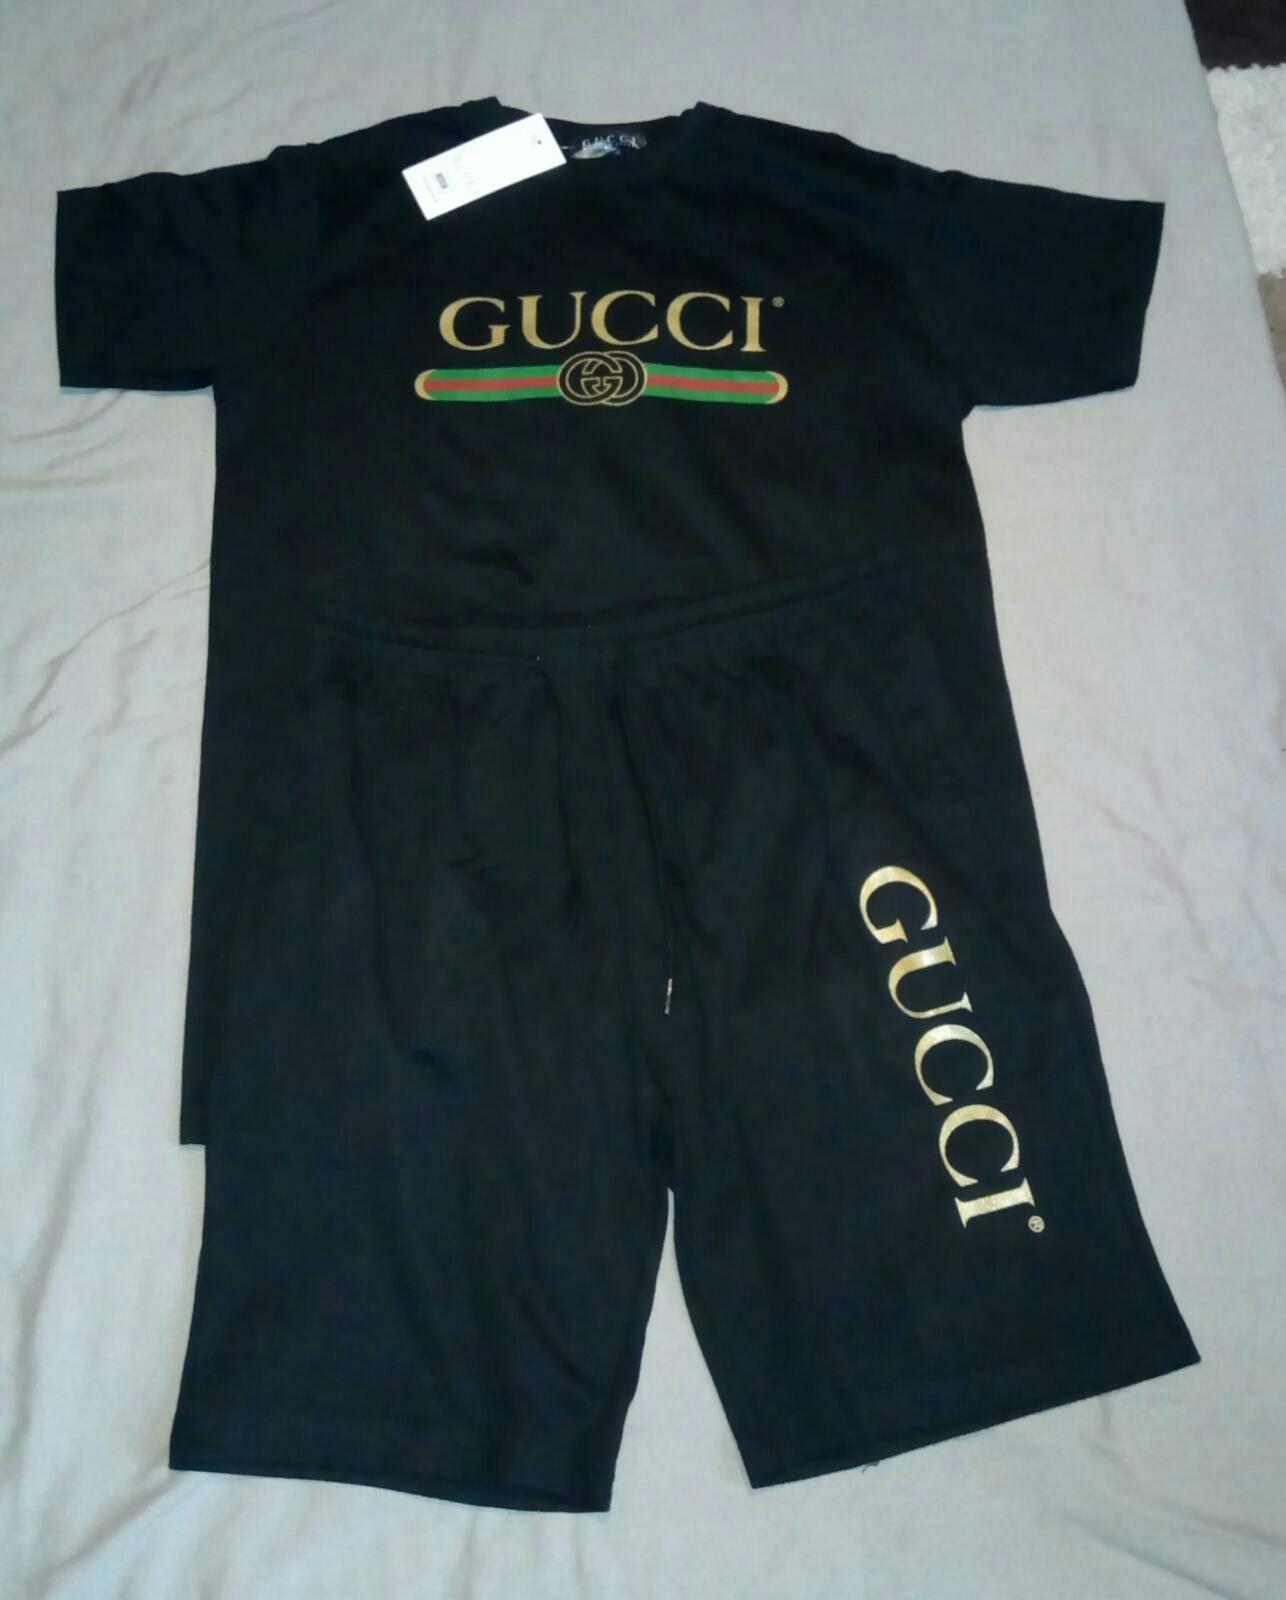 Gucci Clothes For Roblox Buyudum Cocuk Oldum - roblox 5 gucci clothes working 2018 youtube